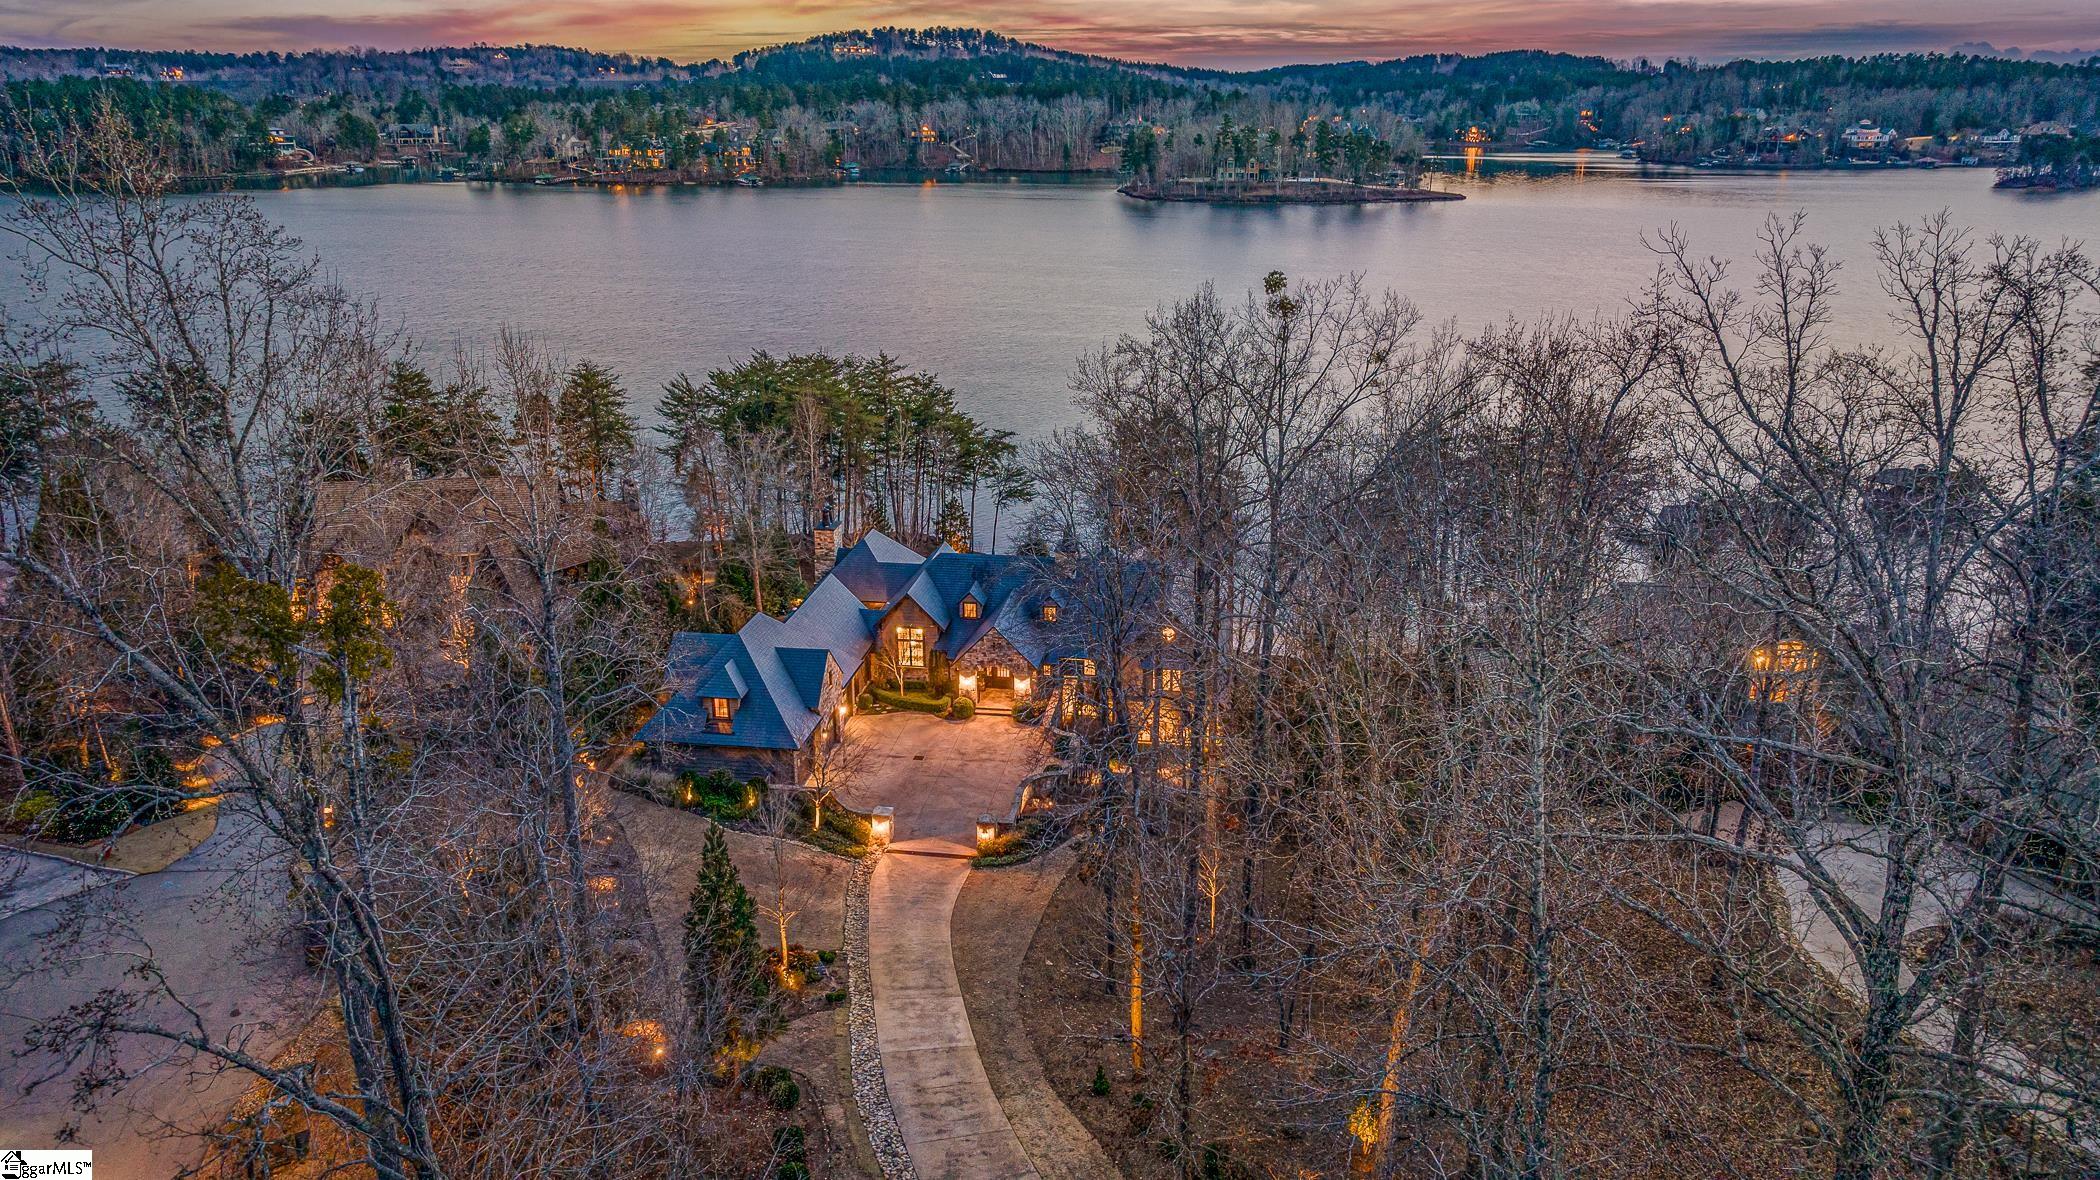 This impressive estate is a handsome mélange of old-world European charm, married to modern substance. The 6,700-foot Brad Wright designed home is strategically positioned to capture big lake views, while retaining precious privacy. Almost 180 feet of prime Lake Keowee shoreline is prefaced by a gently sloping topography, and accented by a sandy beach and custom-engineered, covered dock. Lush, lake-irrigated landscaping and impressive hardscaping includes terraces, impeccable plantings, culinary garden, and contoured aggregate driveway with turning court. Finishes throughout the 3-4-bedroom, 4.5-bathroom home are richly textured, speaking both to architectural solidity and timeless styling.  Bespoke elements include: nickel-gap paneling; Venetian plaster walls; coffered and beamed ceilings; full stone arches, accents, and fireplaces; lift-operated chandelier; hand forged ironwork, including beam strapping; French oak, wide plank engineered floors; hand forged artisanal light fixtures from Dallas; Douglas fir and antique beams; knotty alder interior doors; mahogany and cedar exterior doors.  Beyond a natural, solid stone arch, the fully free-flowing main level incorporates a broad staircase to lake level, vast great room with 20’ vaulted ceilings and elevated lake views, open den with coffered ceiling, and, beyond further, echoing arches, the dining room and palatial kitchen.  Lavishly vaulted and beamed, the kitchen generously accommodates two islands. Custom-made, hand-finished cabinets are enhanced by Ashley Norton hardware and a Travertine subway-tile back splash, which extends to the vaulted ceiling. A British range hood with antique beam, and Shaw’s 1897 apron sinks whisper “English Country House” in both kitchen and laundry room. High-end appliances include a Sub-Zero wine chiller and separate 36” fridge and freezers, plumbed Miele coffee station, dual-fuel Thermador range (with convection and steam options), and Scotsman sonic ice machine. Dutch doors frame an entrance to the kitchen courtyard, herb garden, and oversized porch with ashlar flooring, disappearing screens, and full stone fireplace. A discrete hall delineates the primary suite, with its cozy den and barn doors opening to the bathroom, where Restoration Hardware accents and numerous built-ins have been custom tailored to the space. Textural tile and stone, and a cast iron garden tub render a spa atmosphere.  Beyond the dedicated service area and entry hall and above the generous 3-car garage is en suite apartment guest lodging with wet mini bar. At lake level (beneath 10’ ceilings), a game room, family room with antique onyx floors, stone wine cellar with hammered copper trough sink and Euro Cave wine cooler, and paneled office with built-ins are joined by two heavenly en suite bedrooms, each with garden doors to patio and lake.  Further amenities include remote controlled solar shades, a 22-kw whole-house generator, paneled elevator, 4 HVAC zones, electrostatic filters, Low-E Pella architectural windows, two 80-gallon water heaters with circulator tanks, a radon mitigation system, and Simply AV surround sound and security systems. This architectural masterpiece is matched only by the admirable topography and location of its lakeland setting.